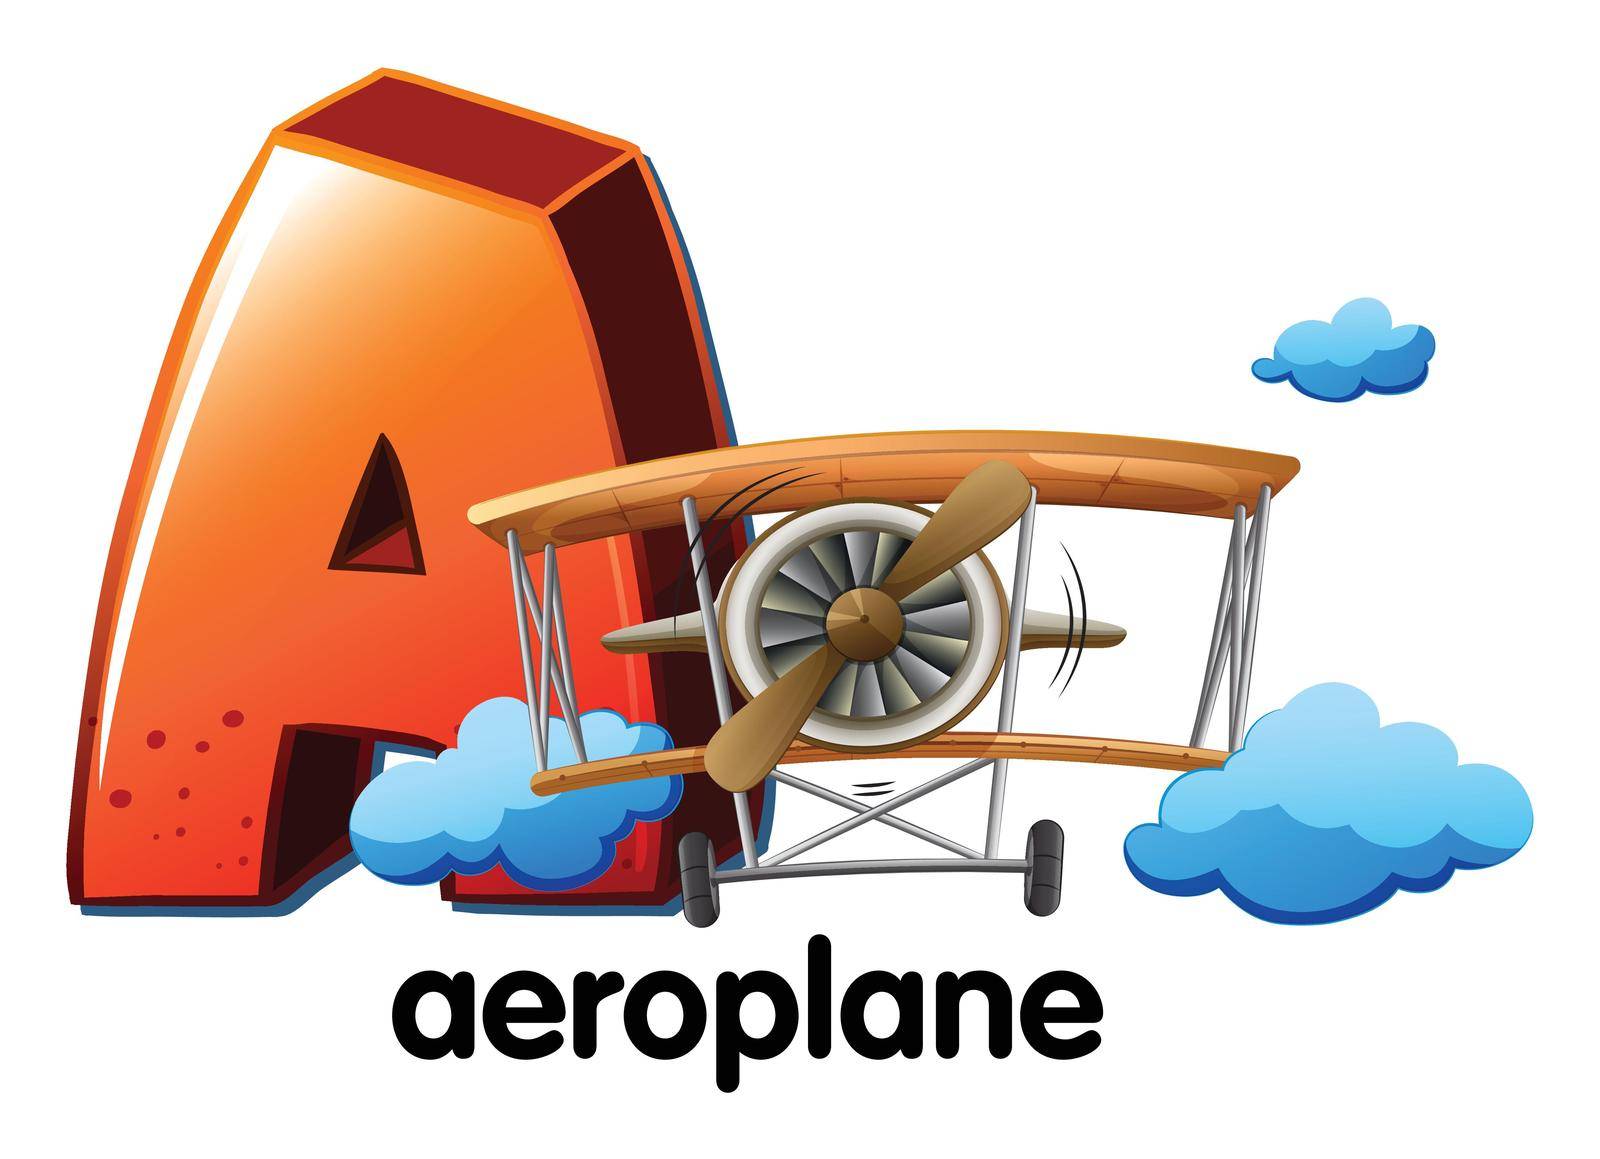 Illustration of letter A for aeroplane on a white background